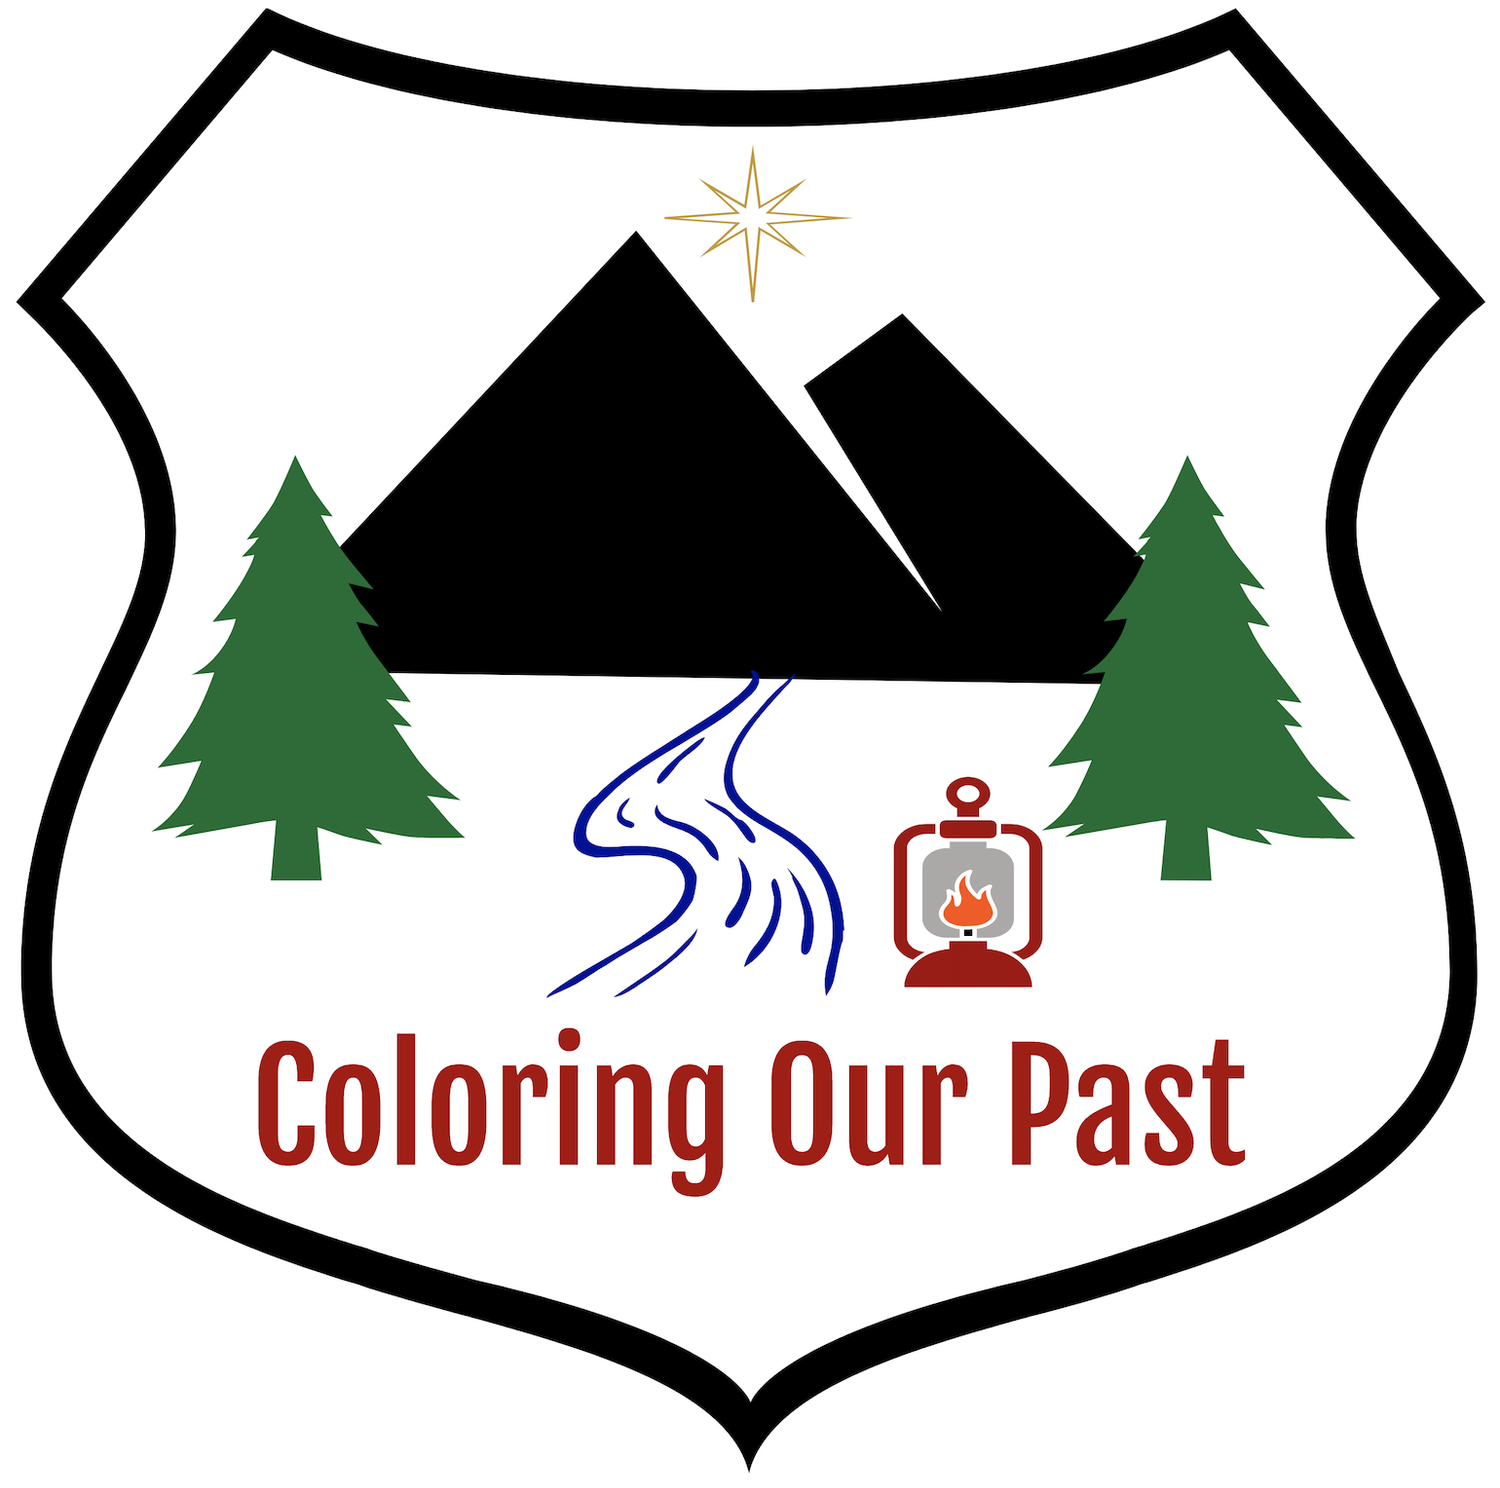 Coloring Our Past